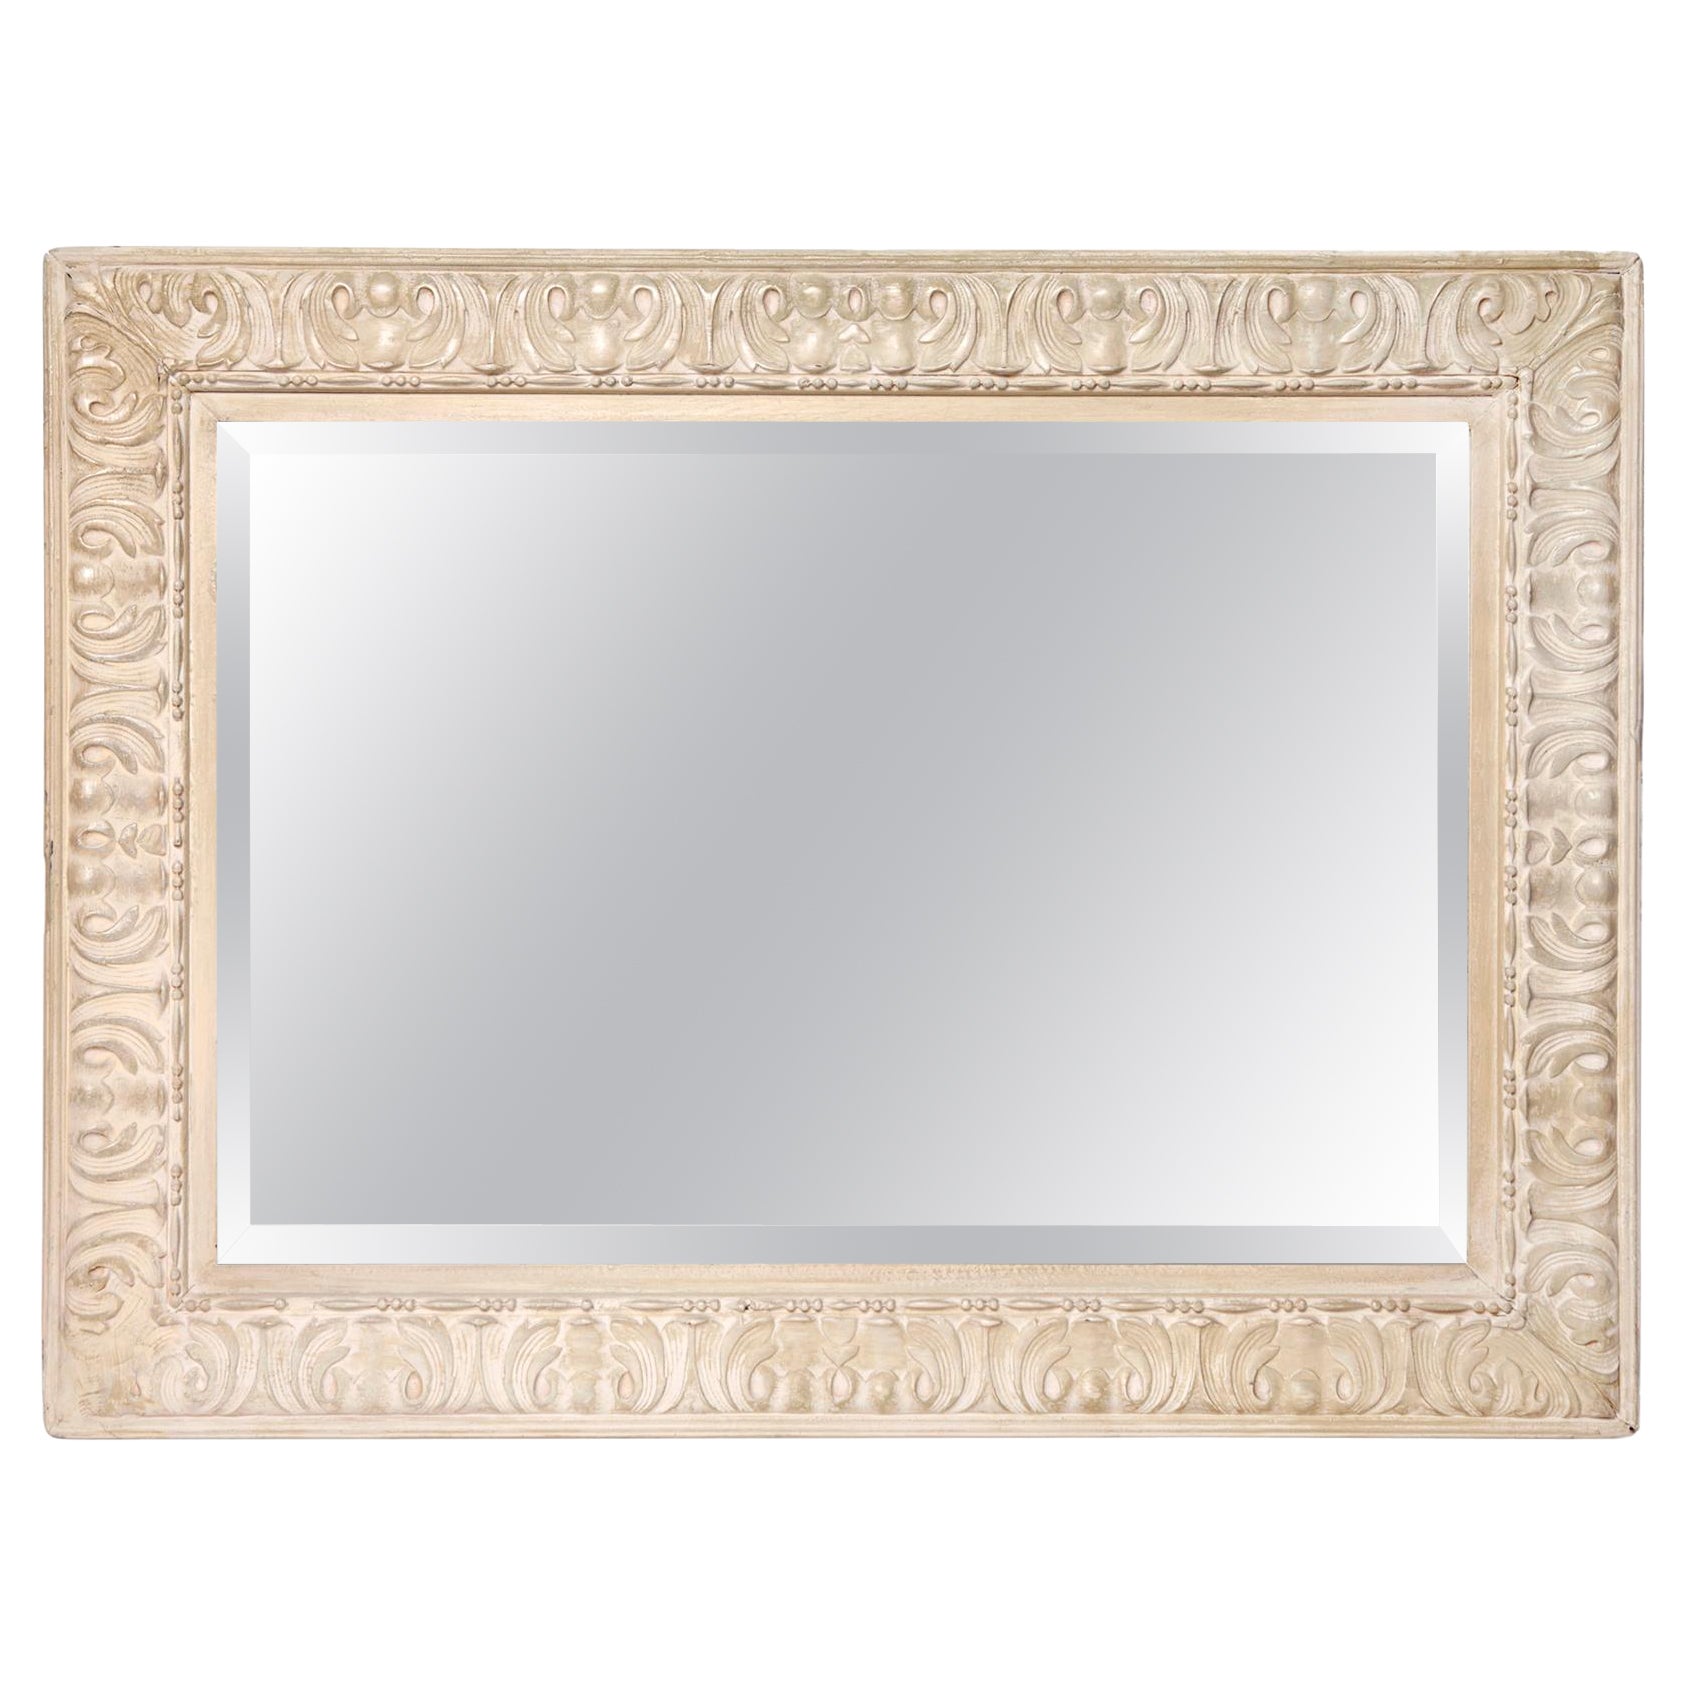 Early 20th Century Large Beveled Ivory Mirror For Sale at 1stDibs